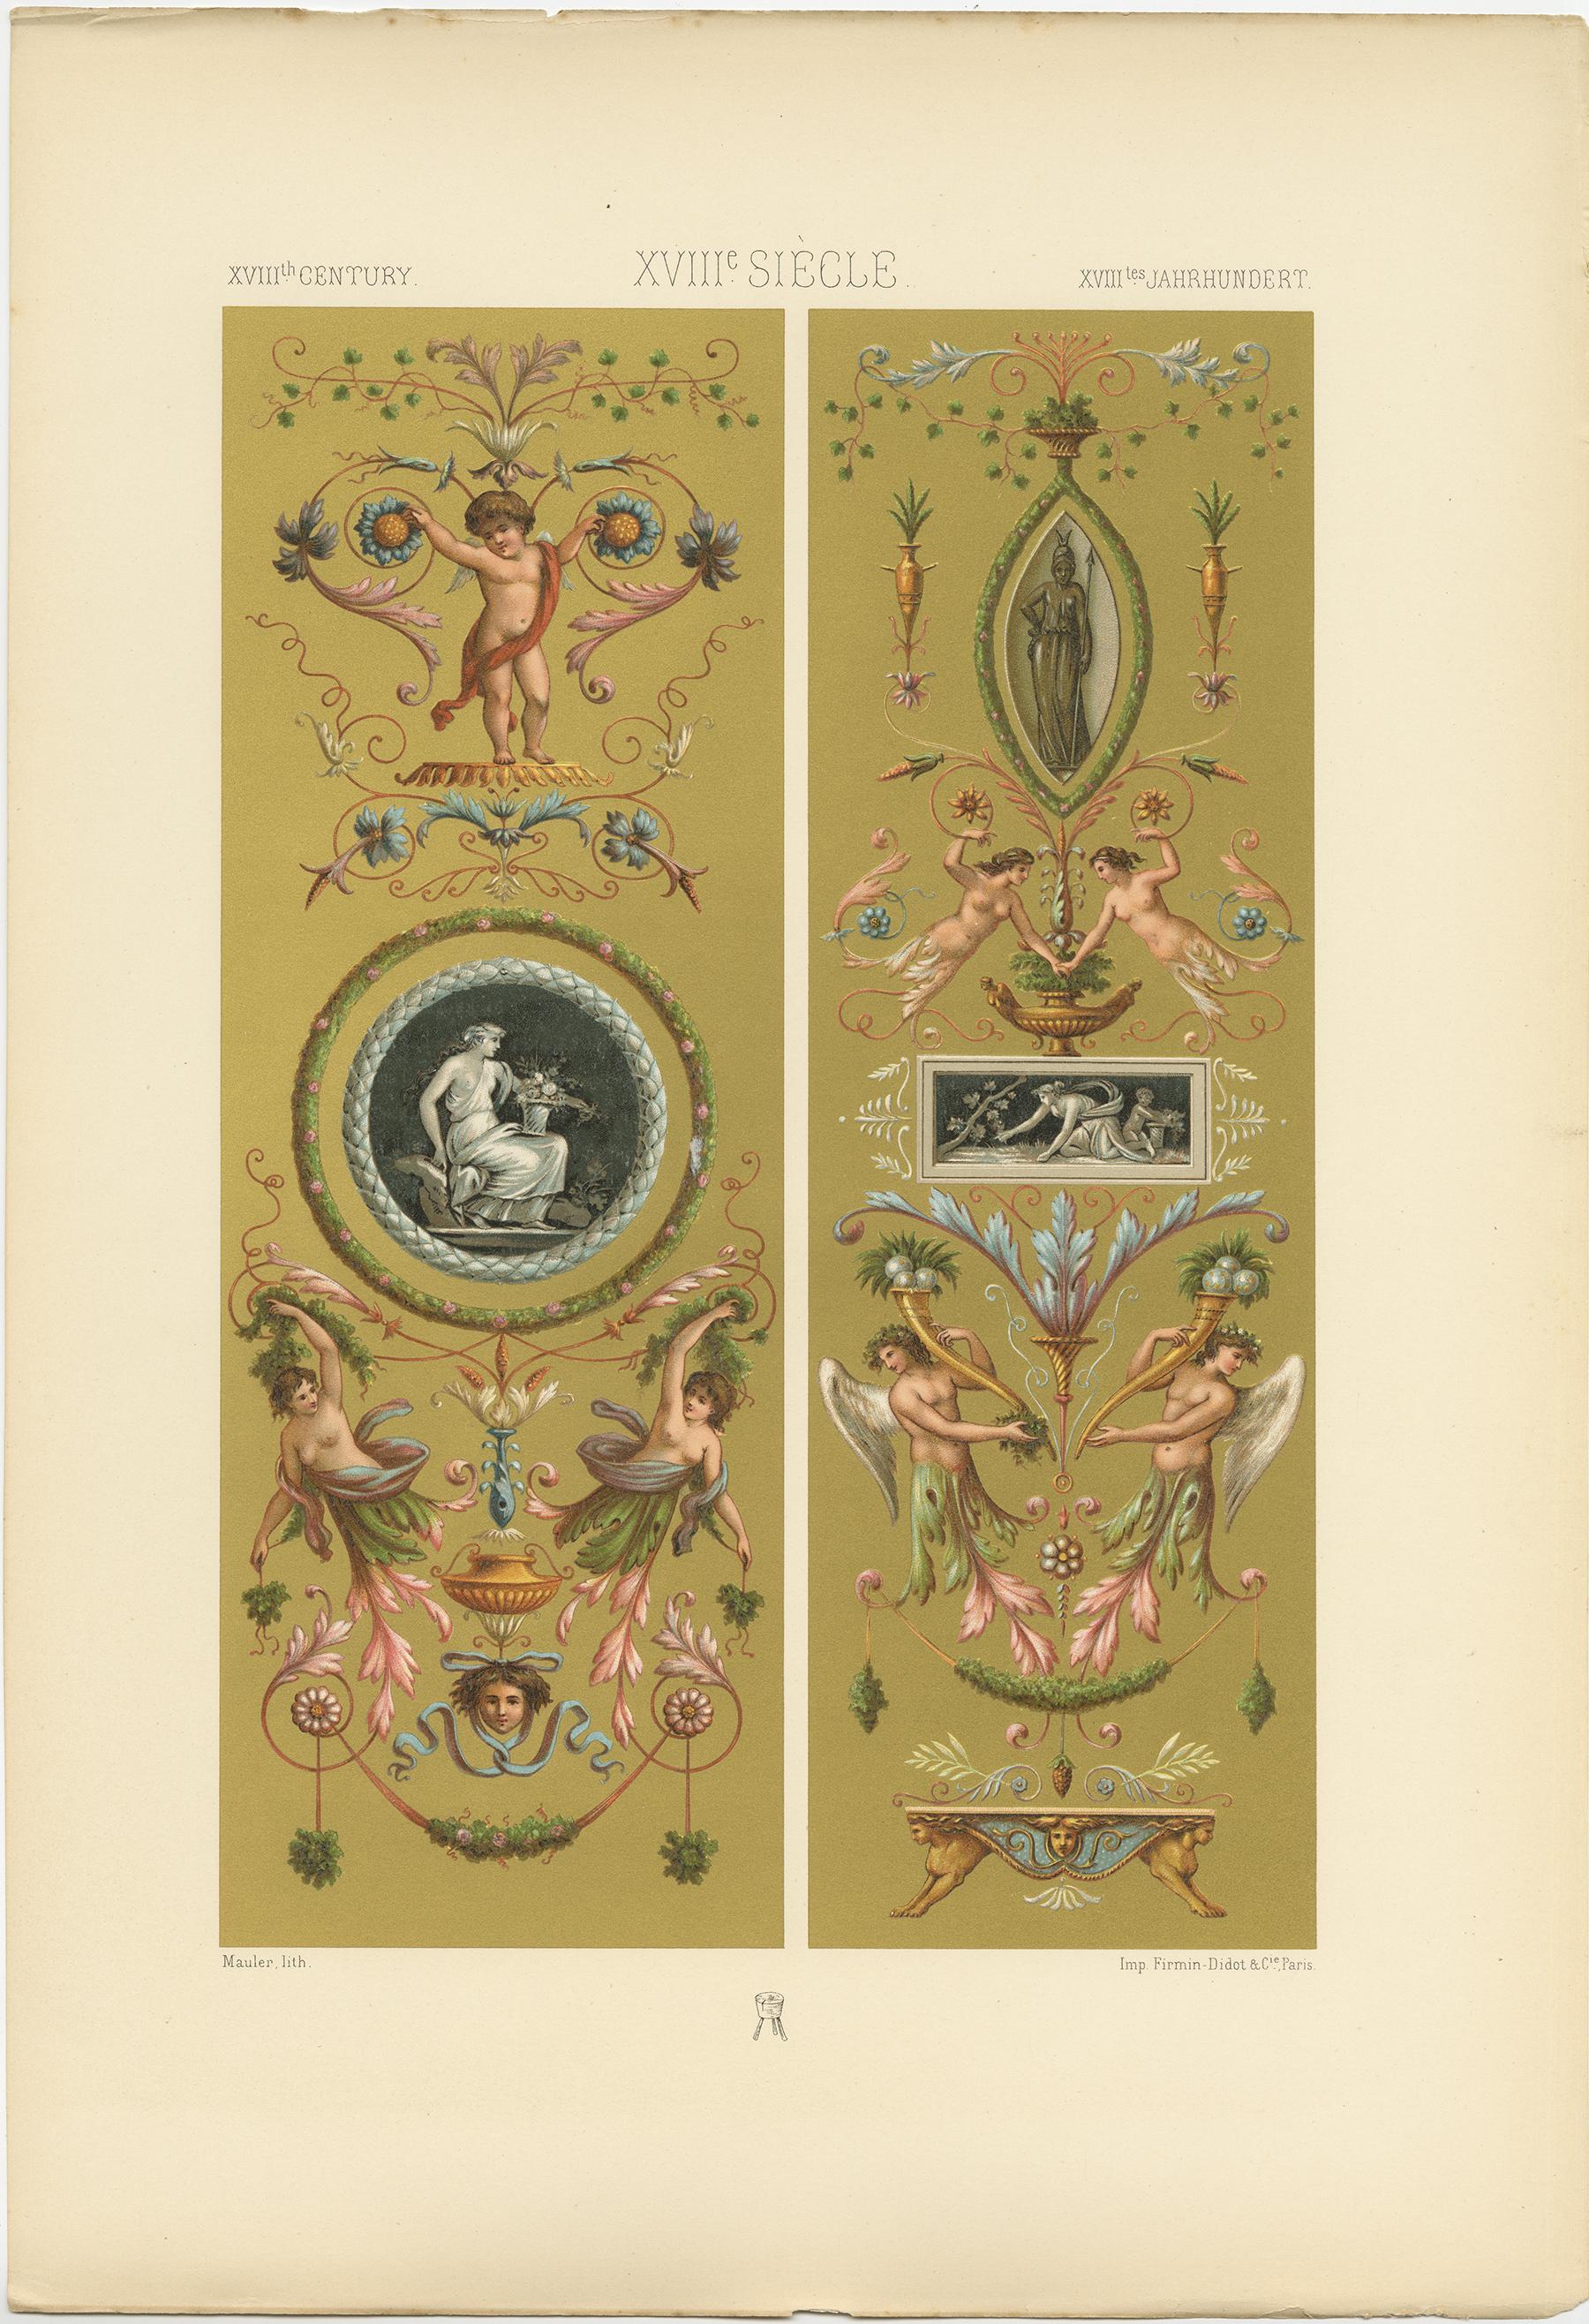 Antique print titled '18th Century - XIIIc Siècle -XVIIIles Jahrhundert'. Chromolithograph of paintings on the glass panels of Louis XVI armoire ornaments. This print originates from 'l'Ornement Polychrome' by Auguste Racinet. Published circa 1890.